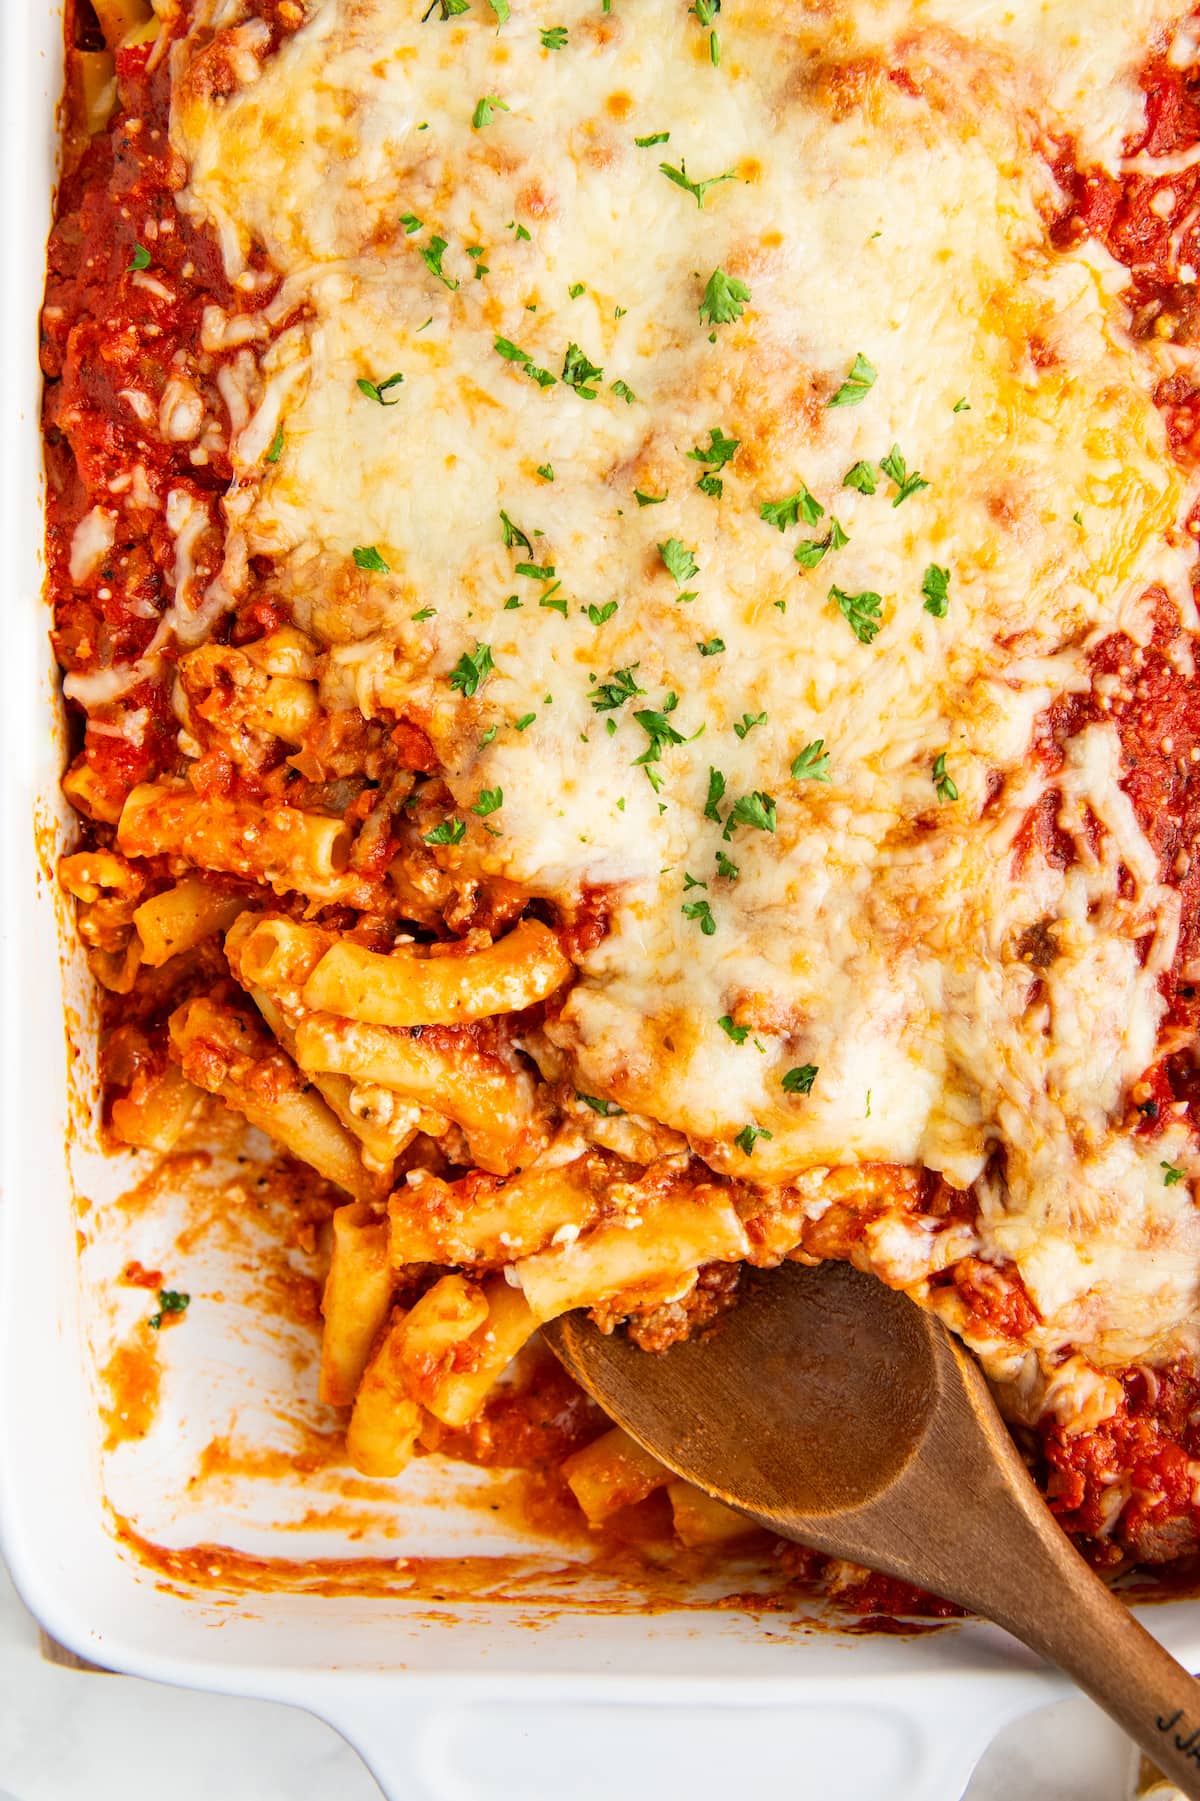 Cooked baked ziti being served with a wooden spoon.